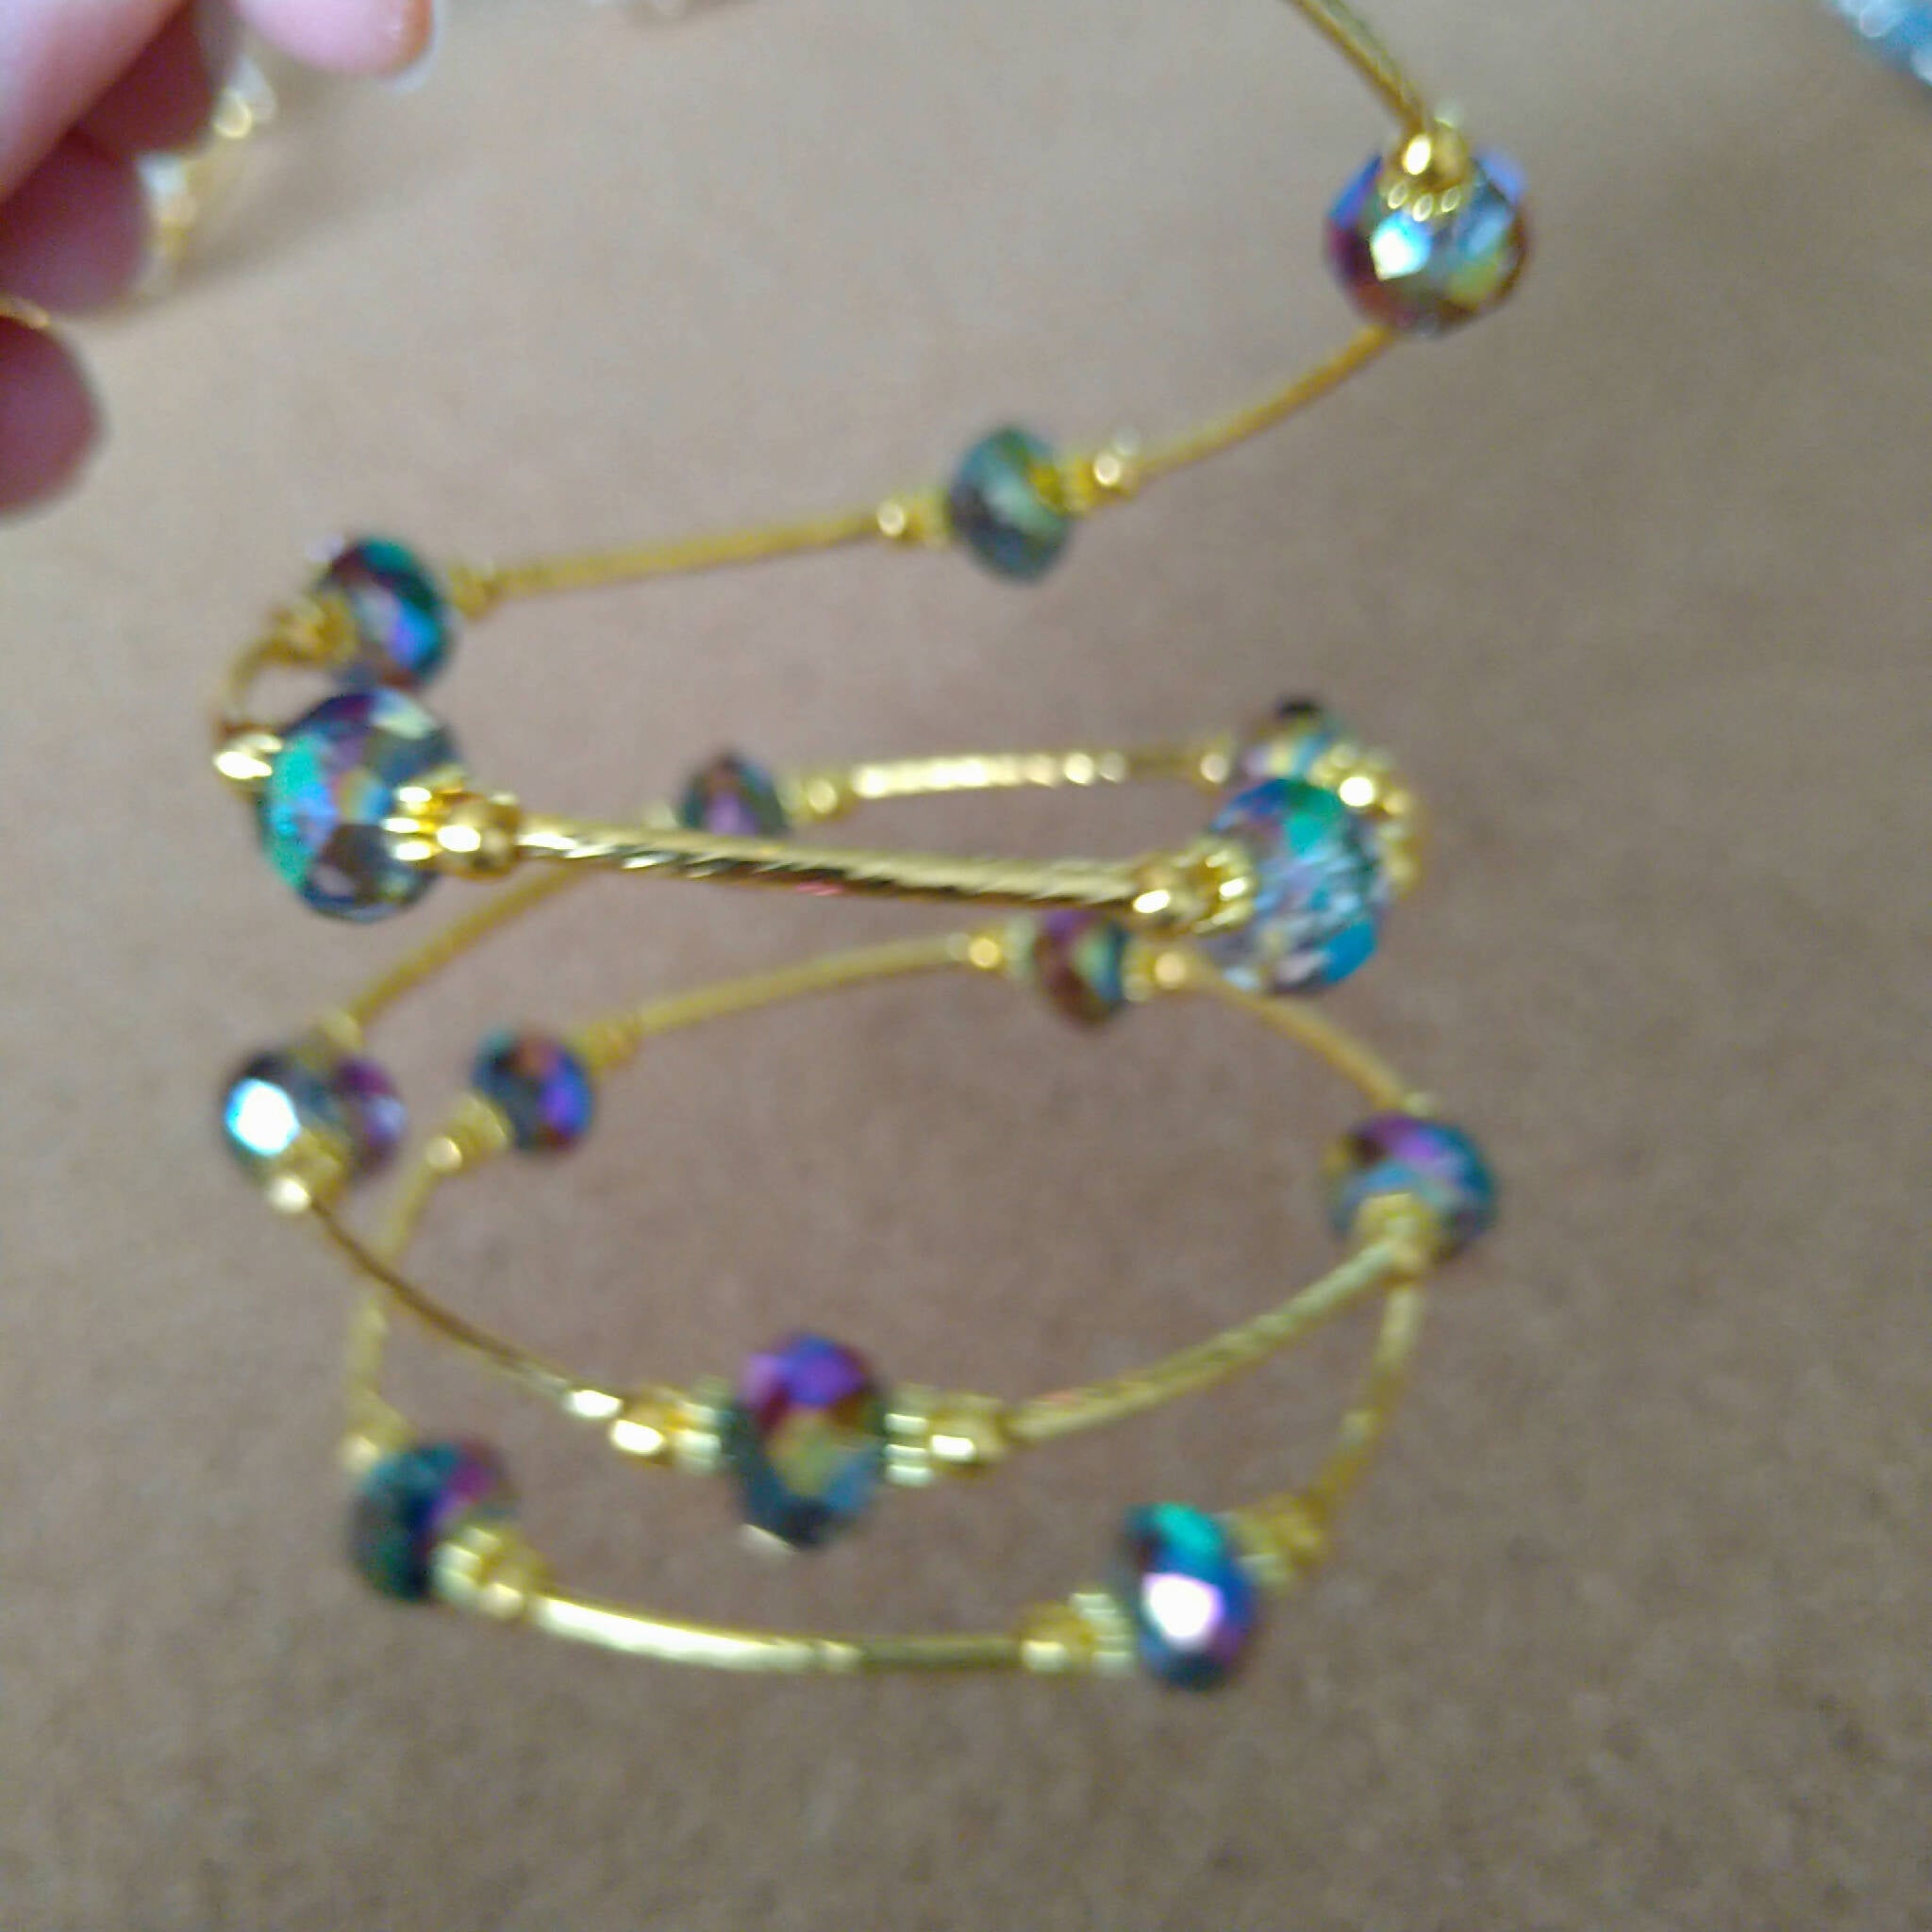 3 strand gold toned memory wire bangle with blue/purple AB finish beads, 6cm diameter